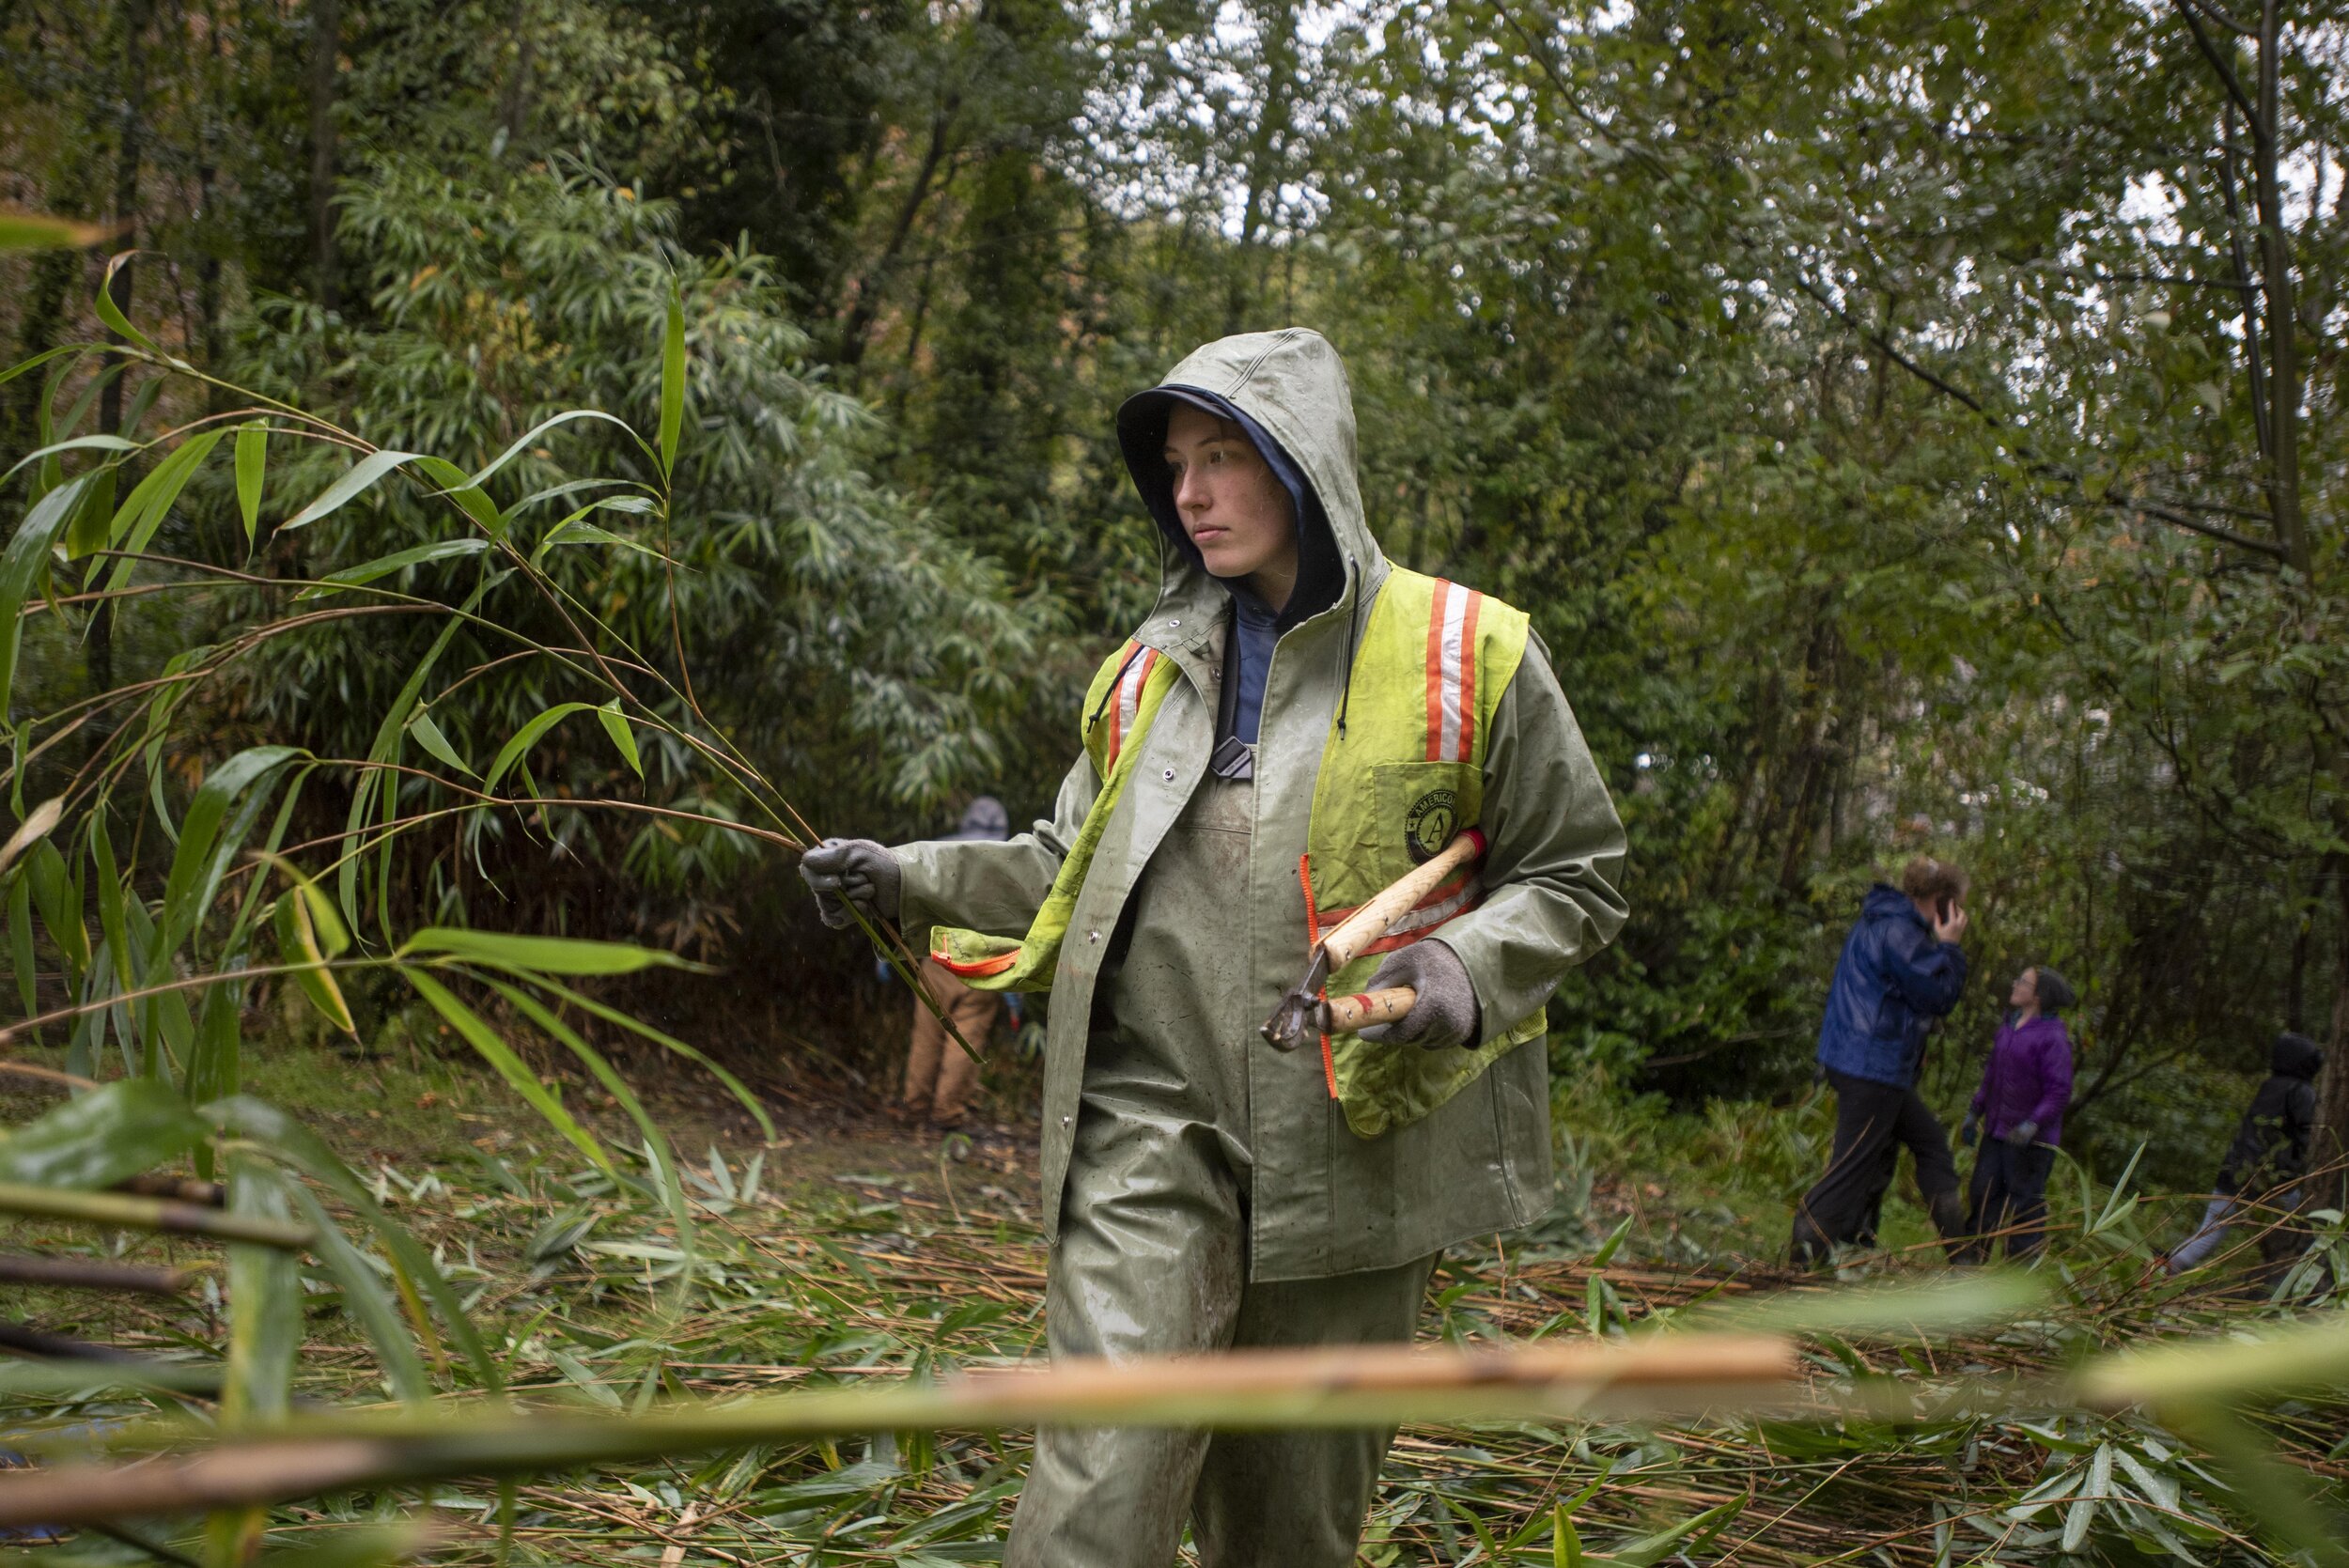  Invasive species removal is a key part of environmental restoration work across Washington. Here, removing invasive bamboo from Longfellow Creek in West Seattle. Photo by Hannah Letinich. 